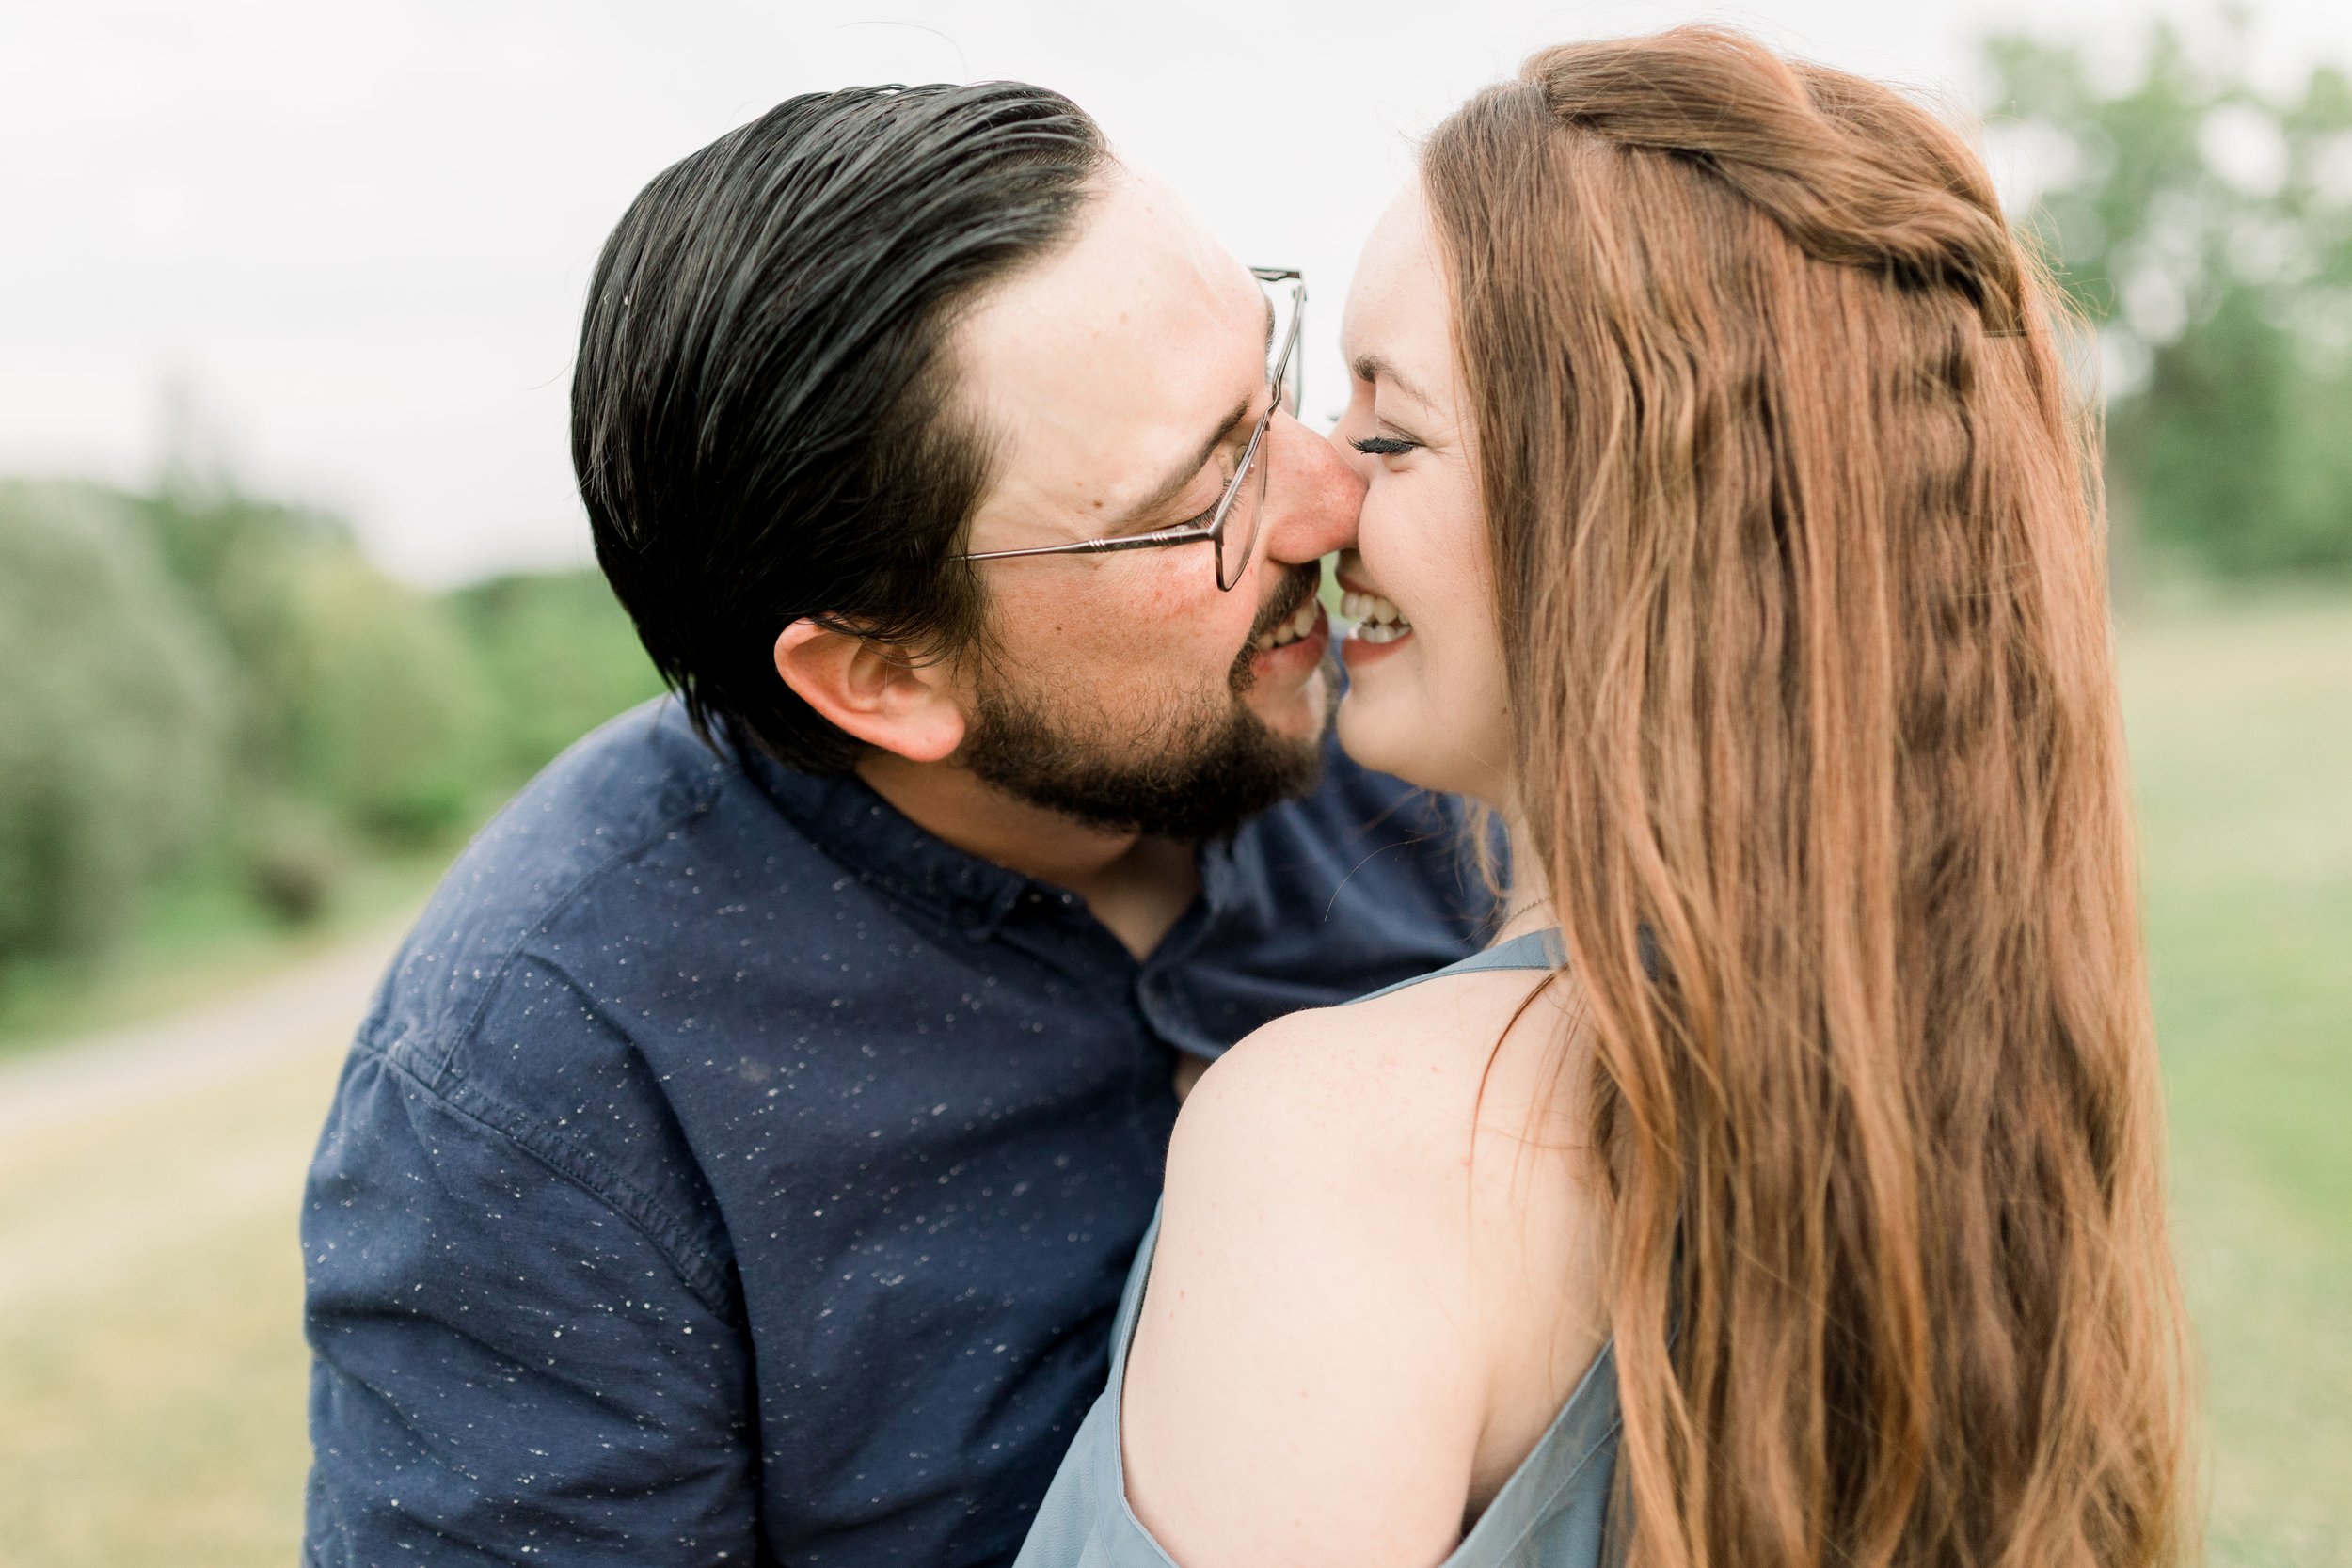  In Ottawa, an engaged couple kisses as the woman laughs by Chelsea Mason Photography. red boho engagement hair kissing couple blue button-up #chelseamasonphotography #chelseamasonengagements #Ottawaengagements #DominonArboretum #Ottawaphotographers&